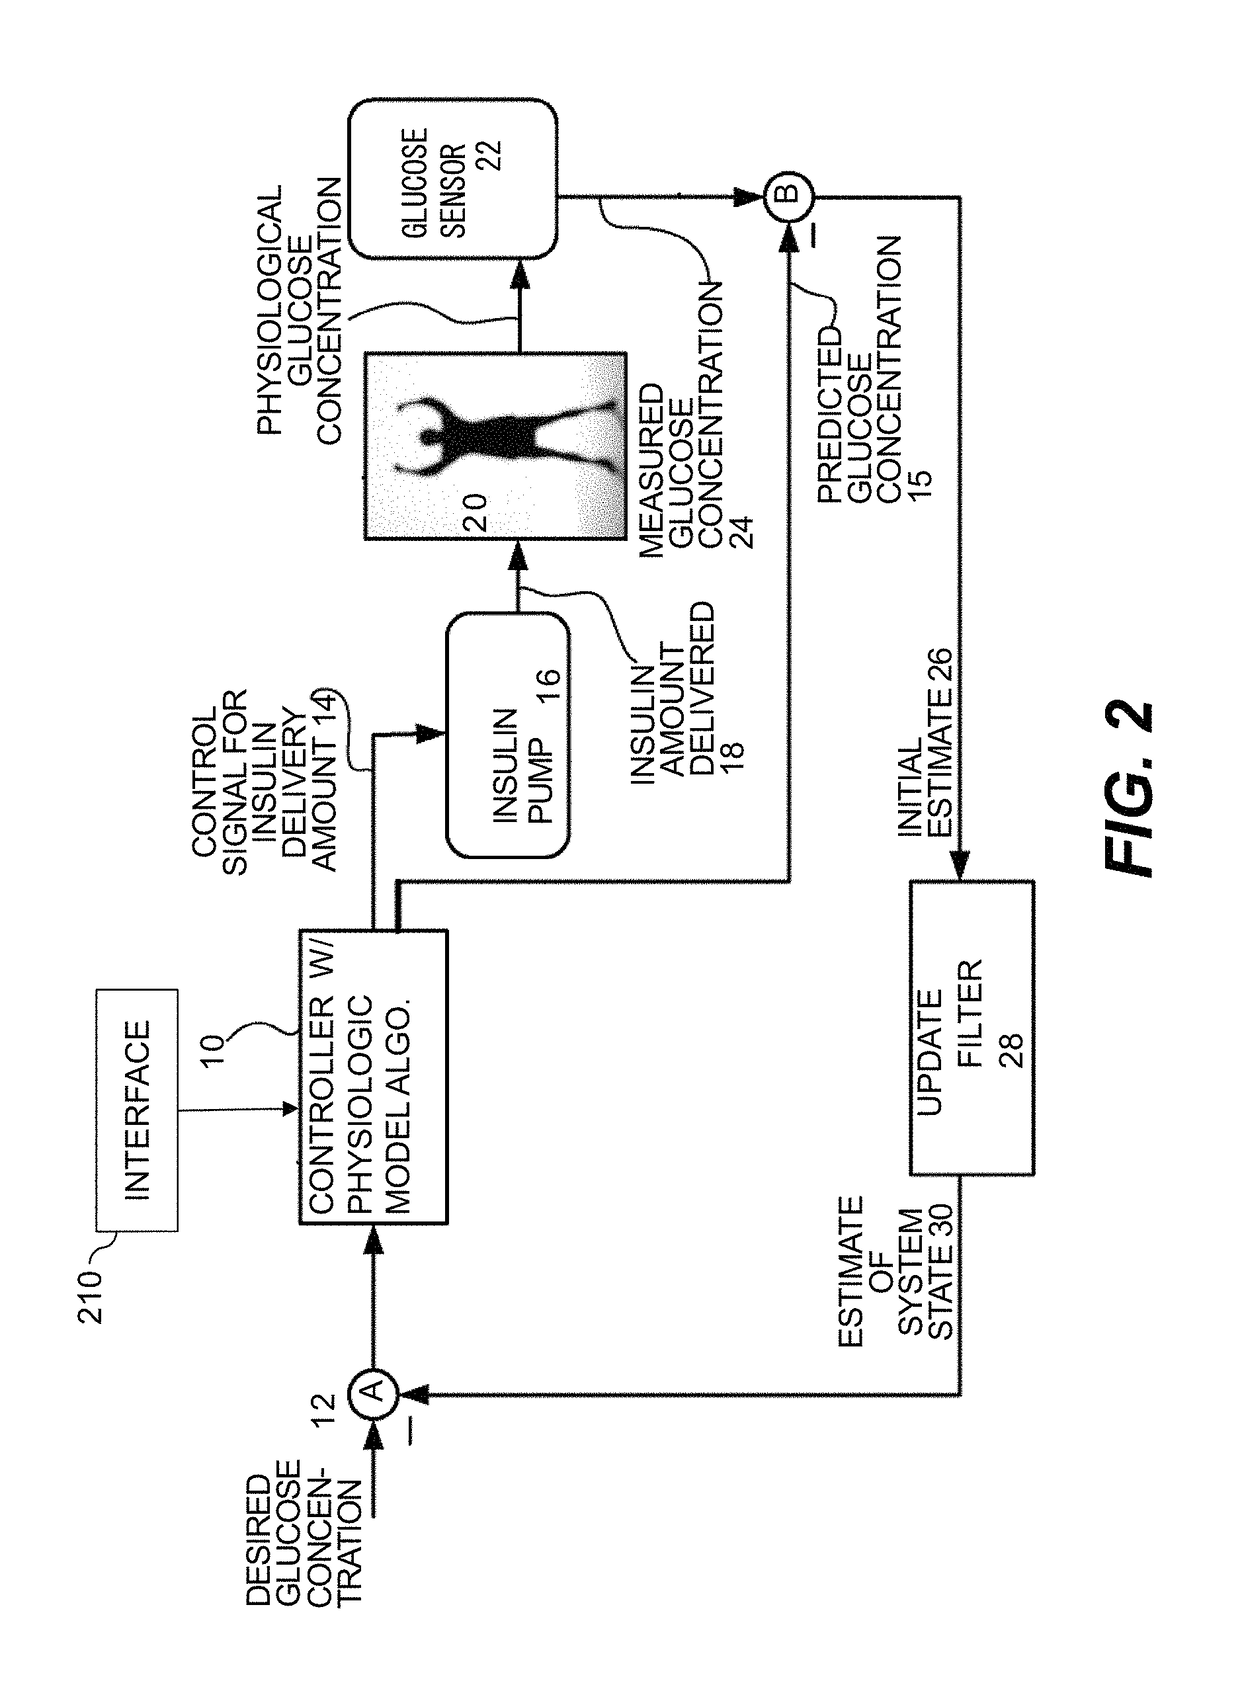 Method and system for closed-loop control of an artificial pancreas